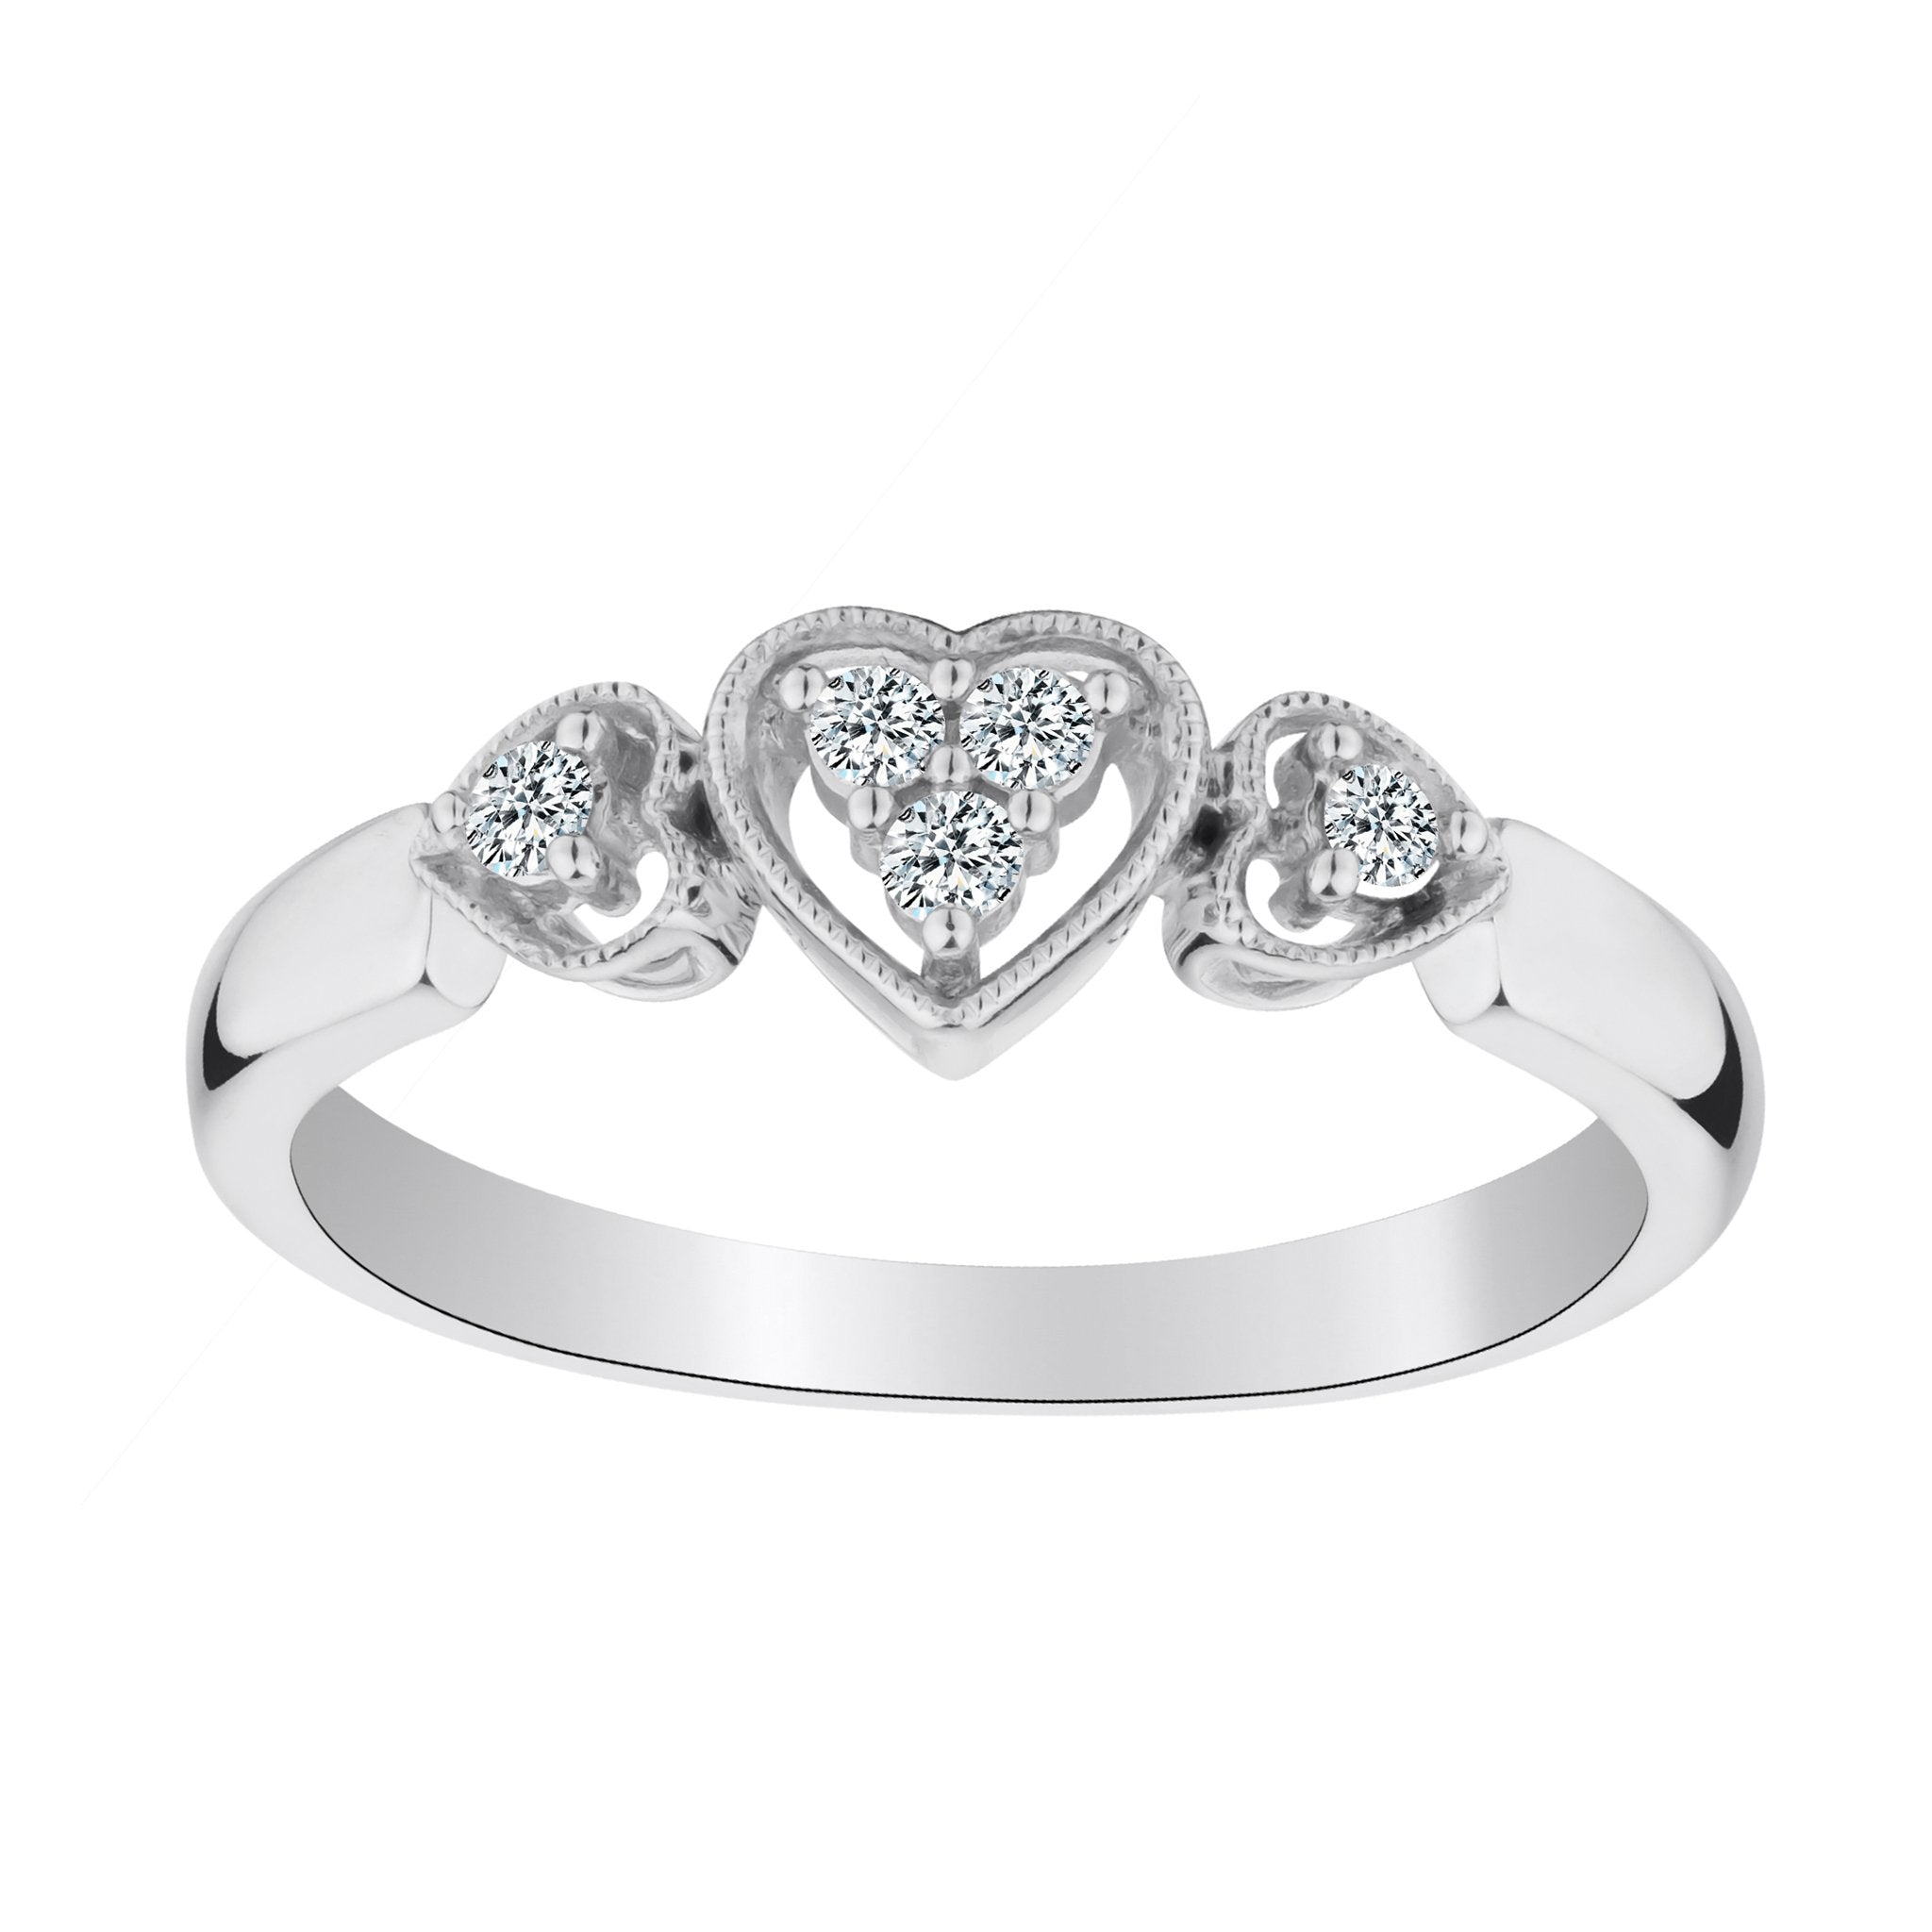 .10 CARAT DIAMOND "PAST, PRESENT, FUTURE" HEART RING, 10kt WHITE GOLD. Fashion Rings - Griffin Jewellery Designs